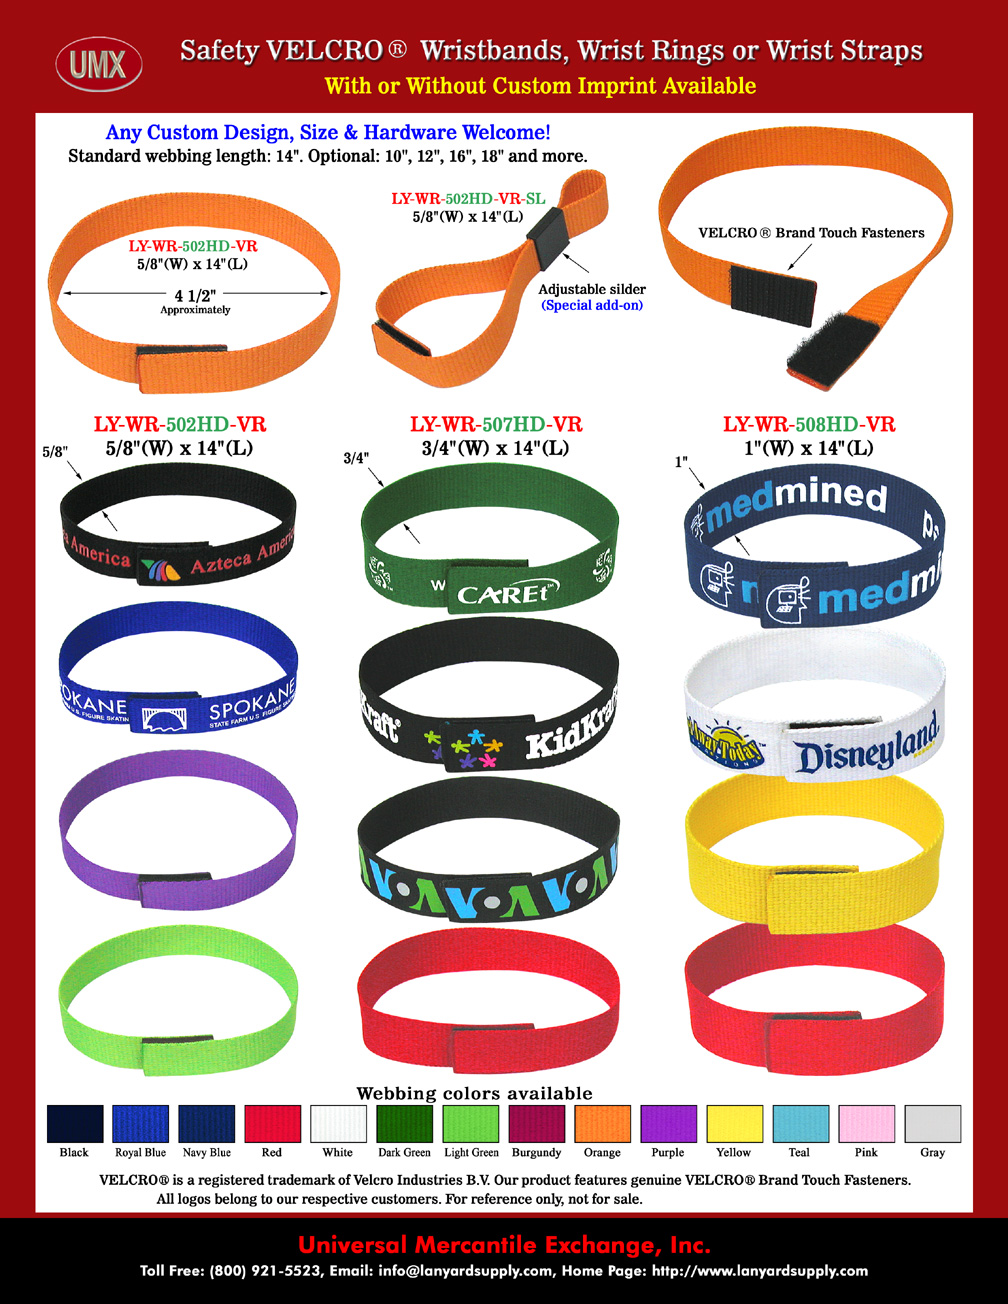 5/8",3/4" and 1" Plain Color Velcro® Safety Wristband, Bracelet, Wrist Band, Strap or Ring Lanyard At No Metal..